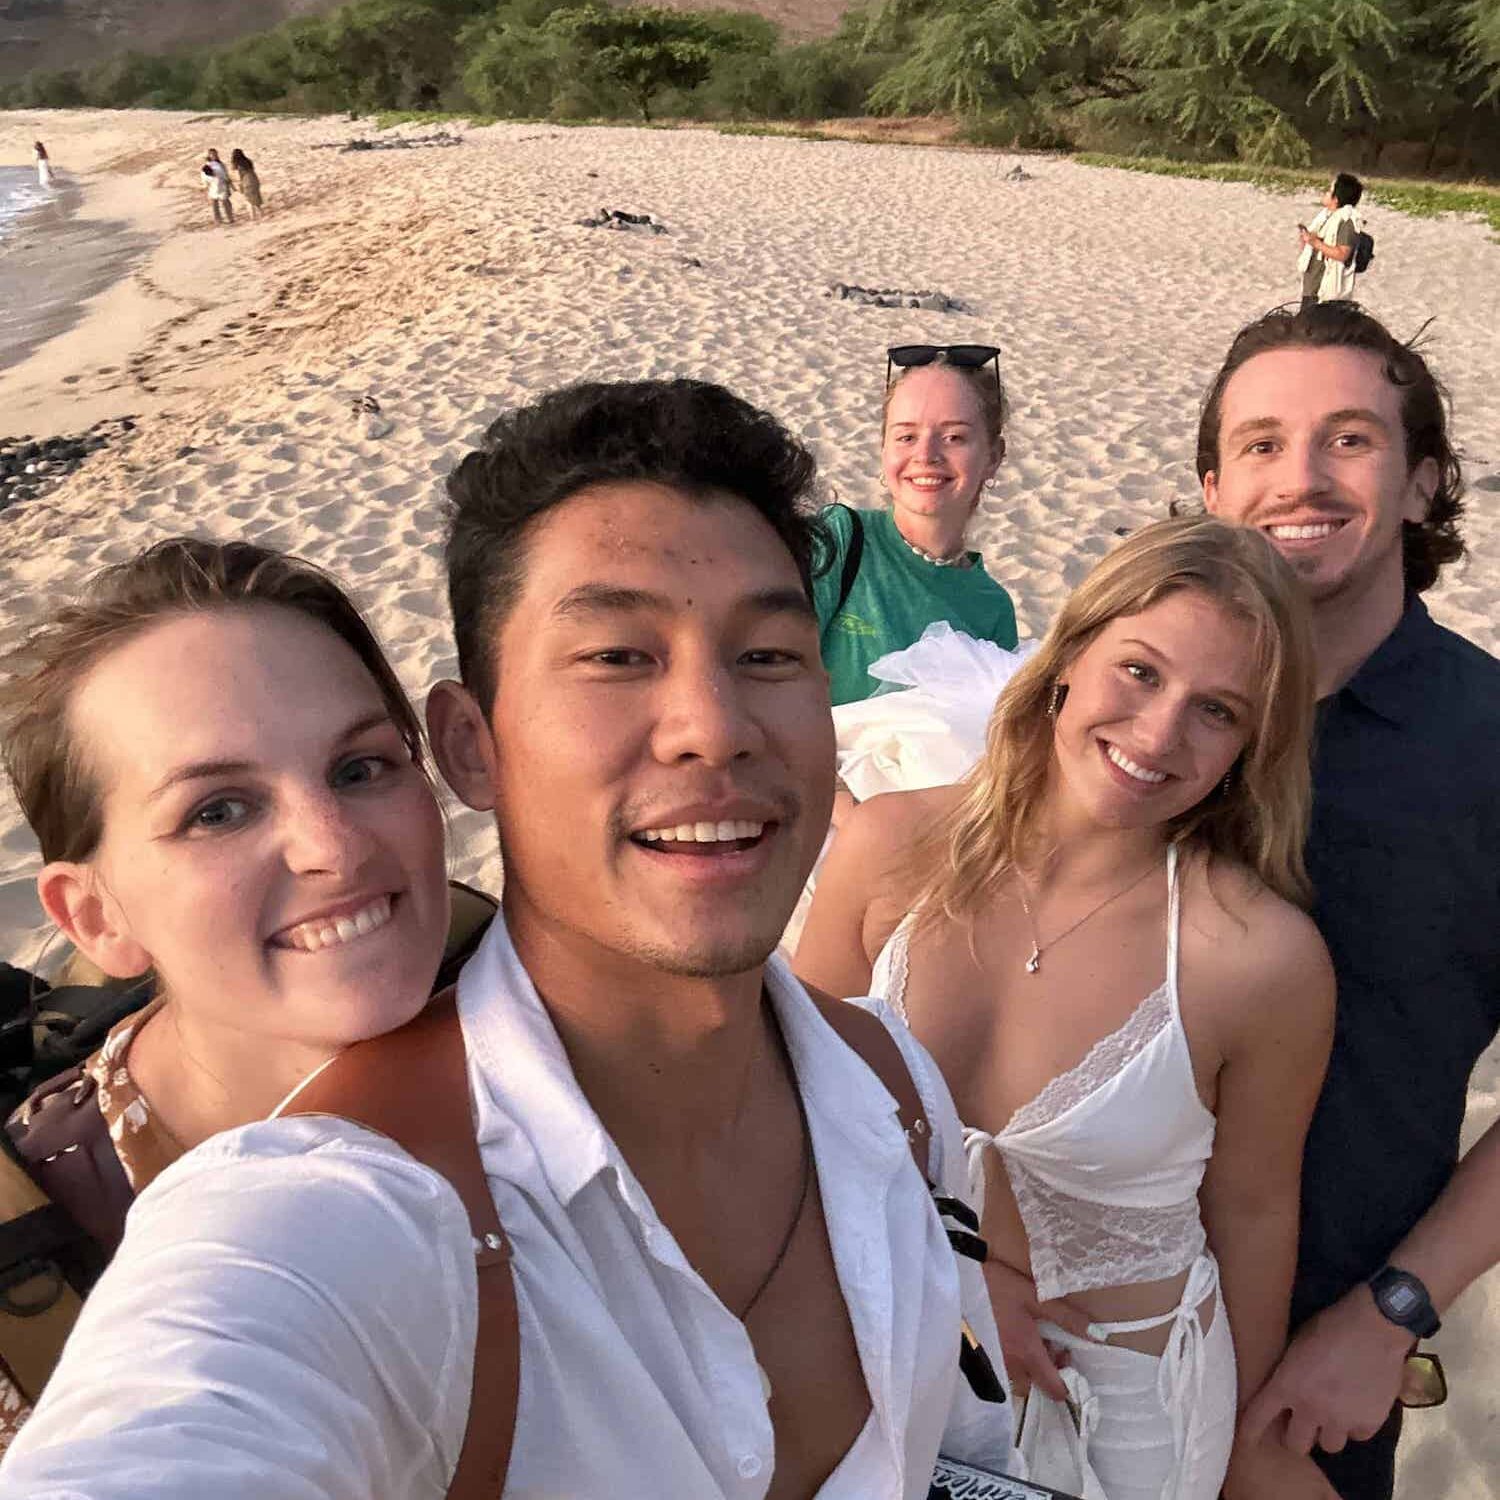 selfies of wedding photographer and his couples after their beach engagement shoot